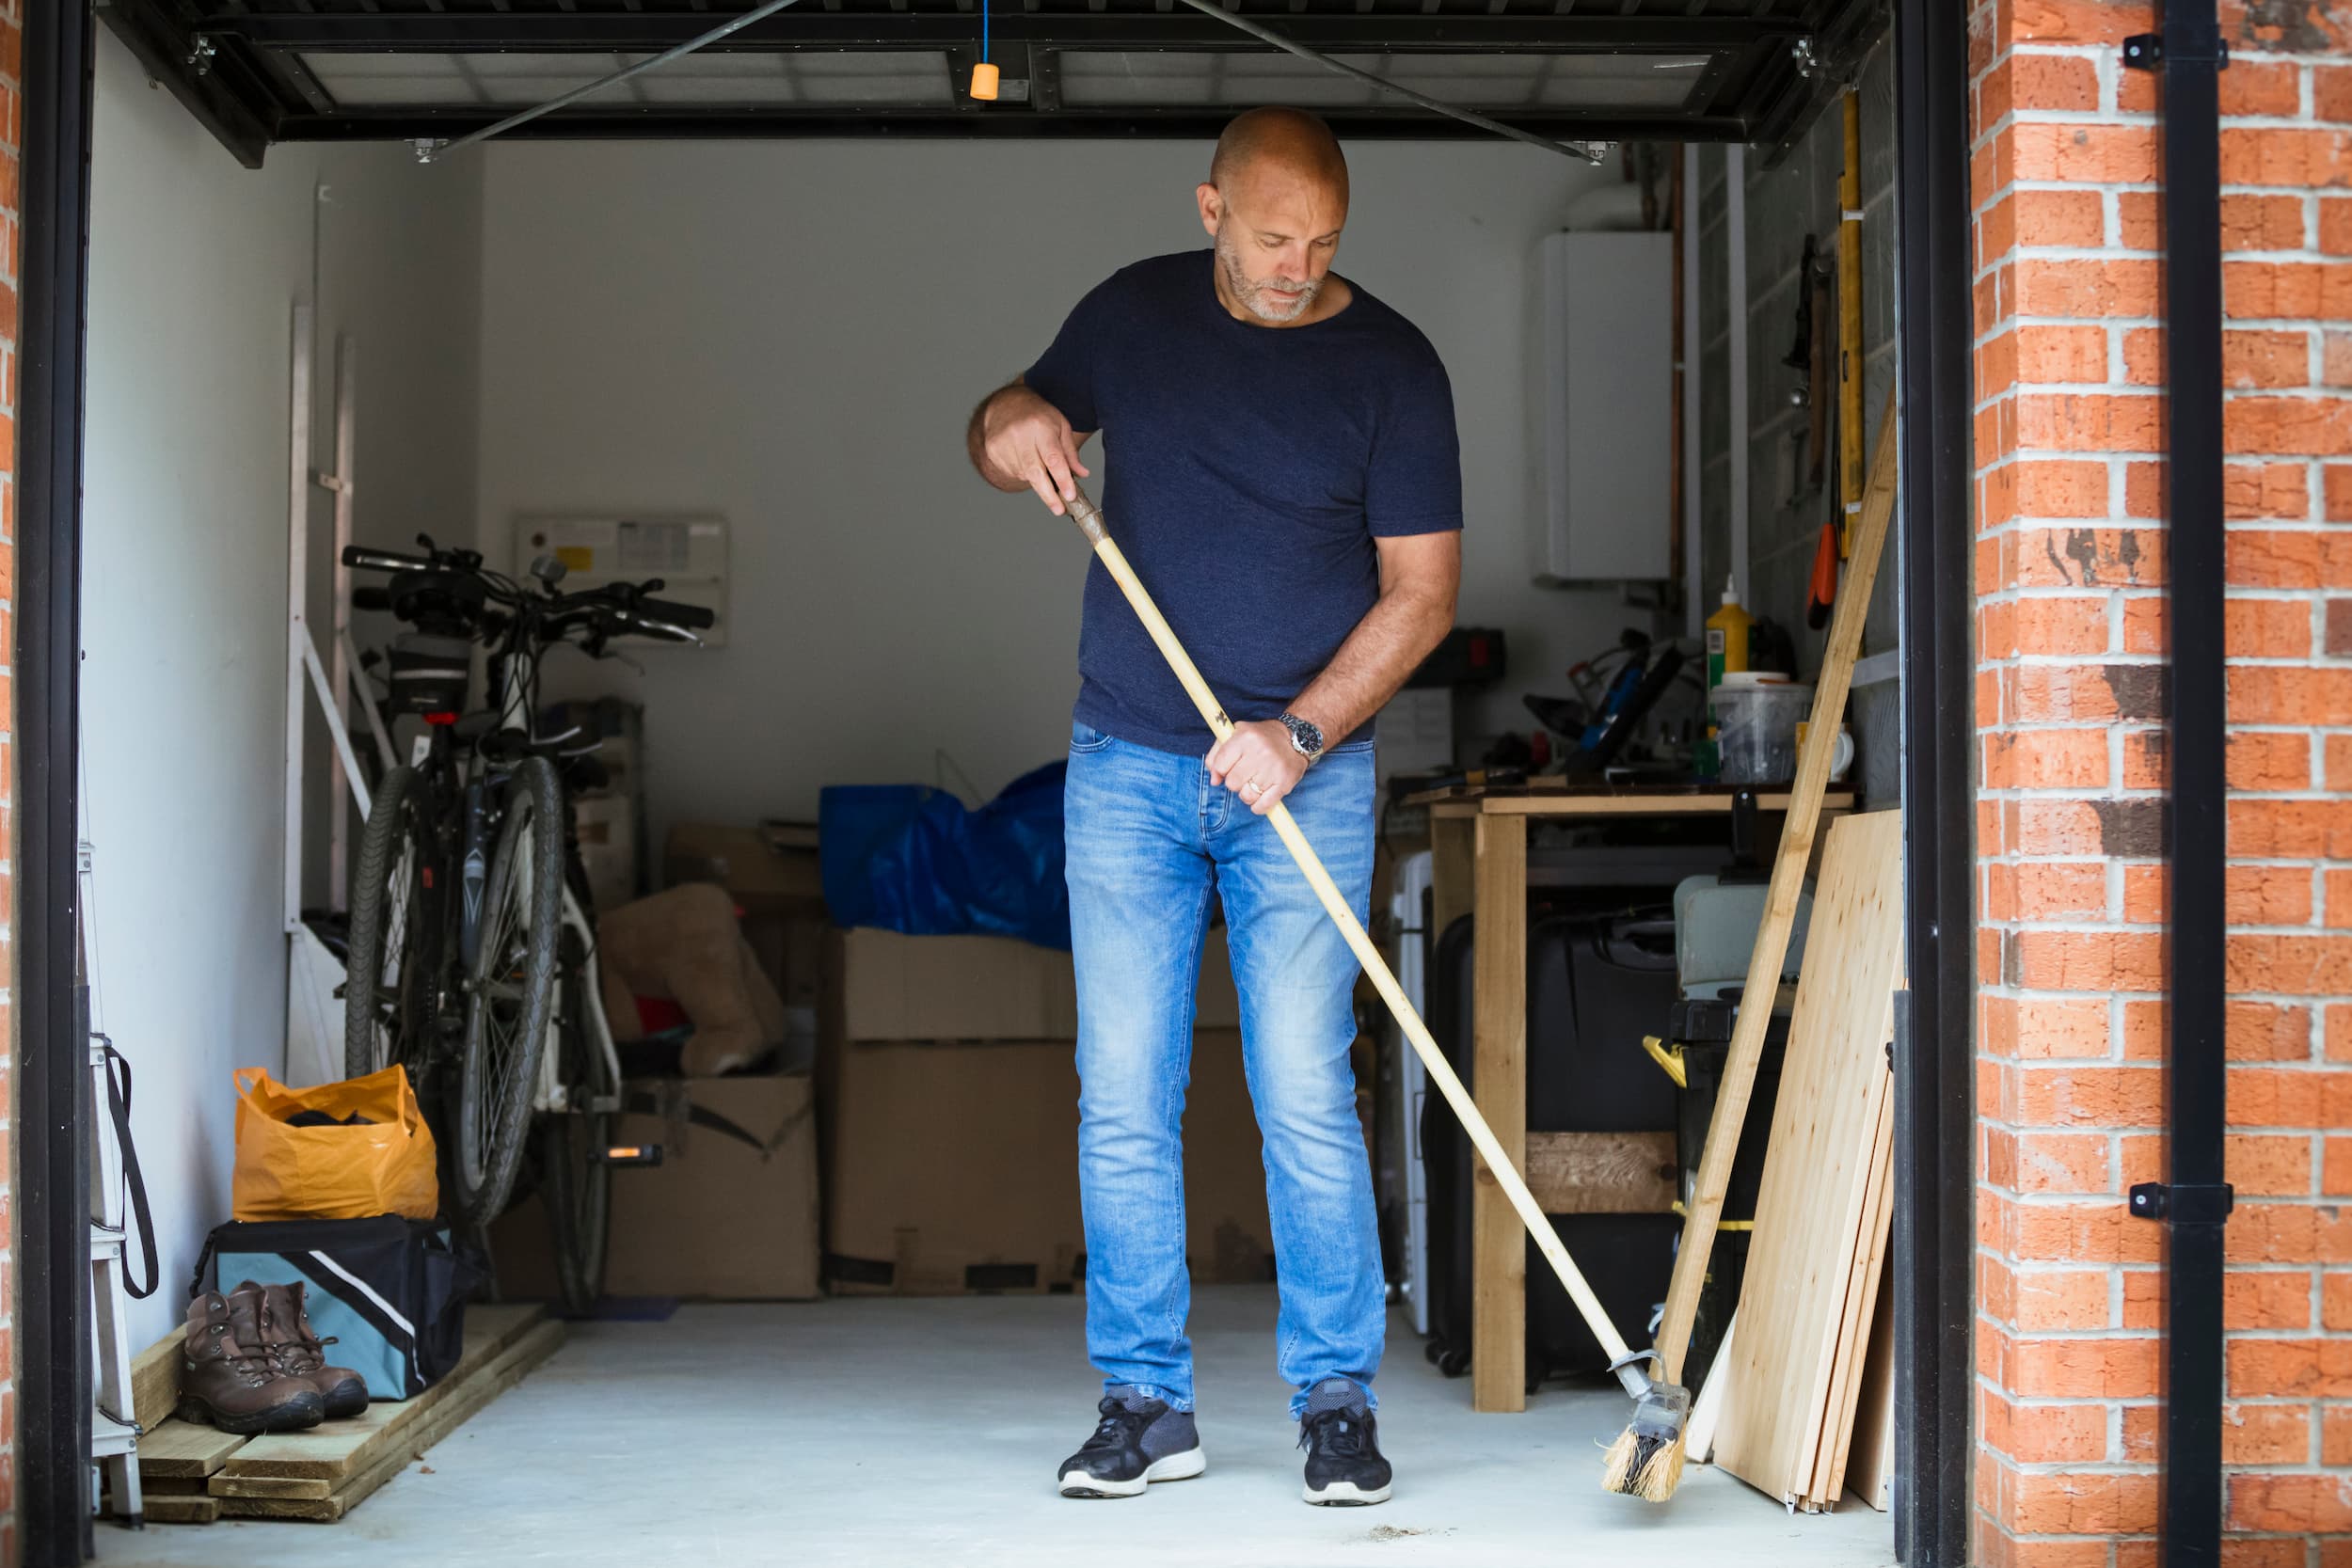 Storage solutions for spring cleaning in the garage